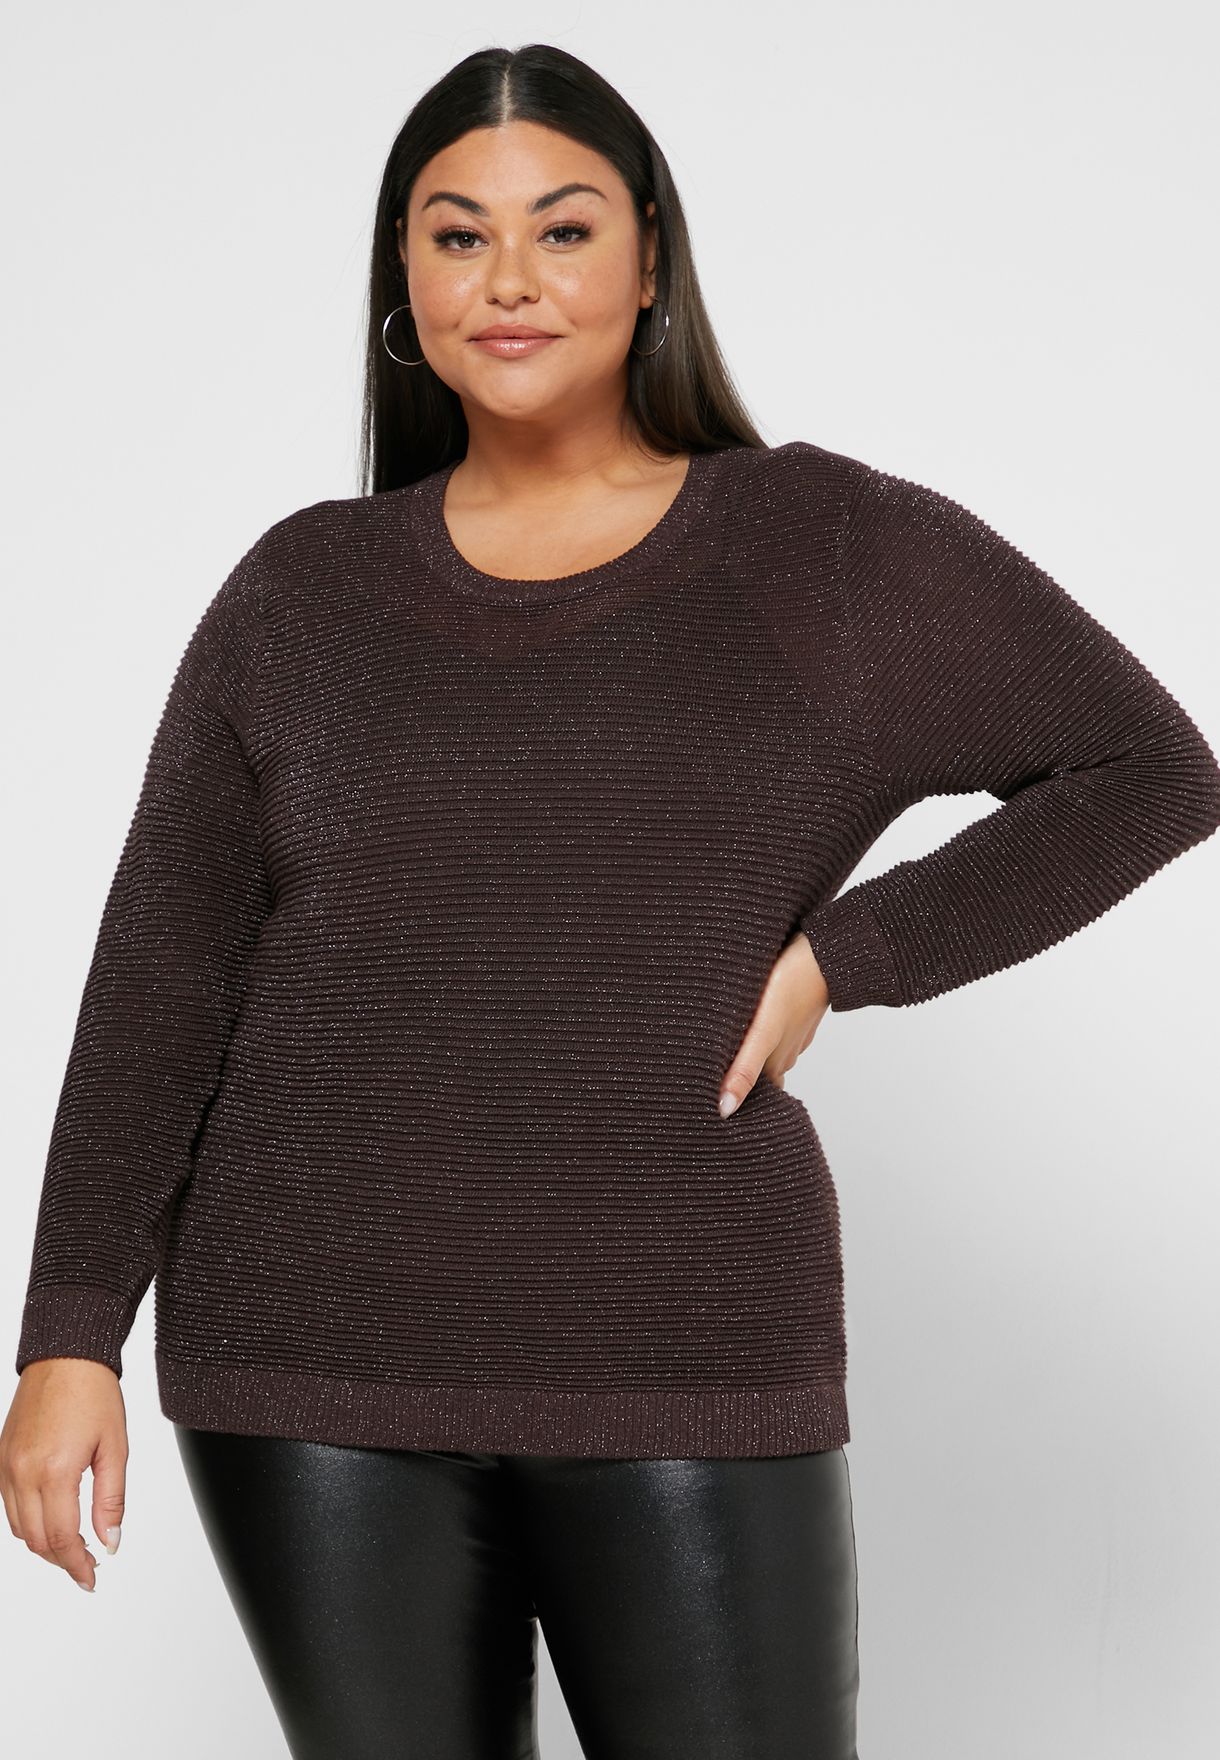 brown Crew Neck for Women in Worldwide - M50116A